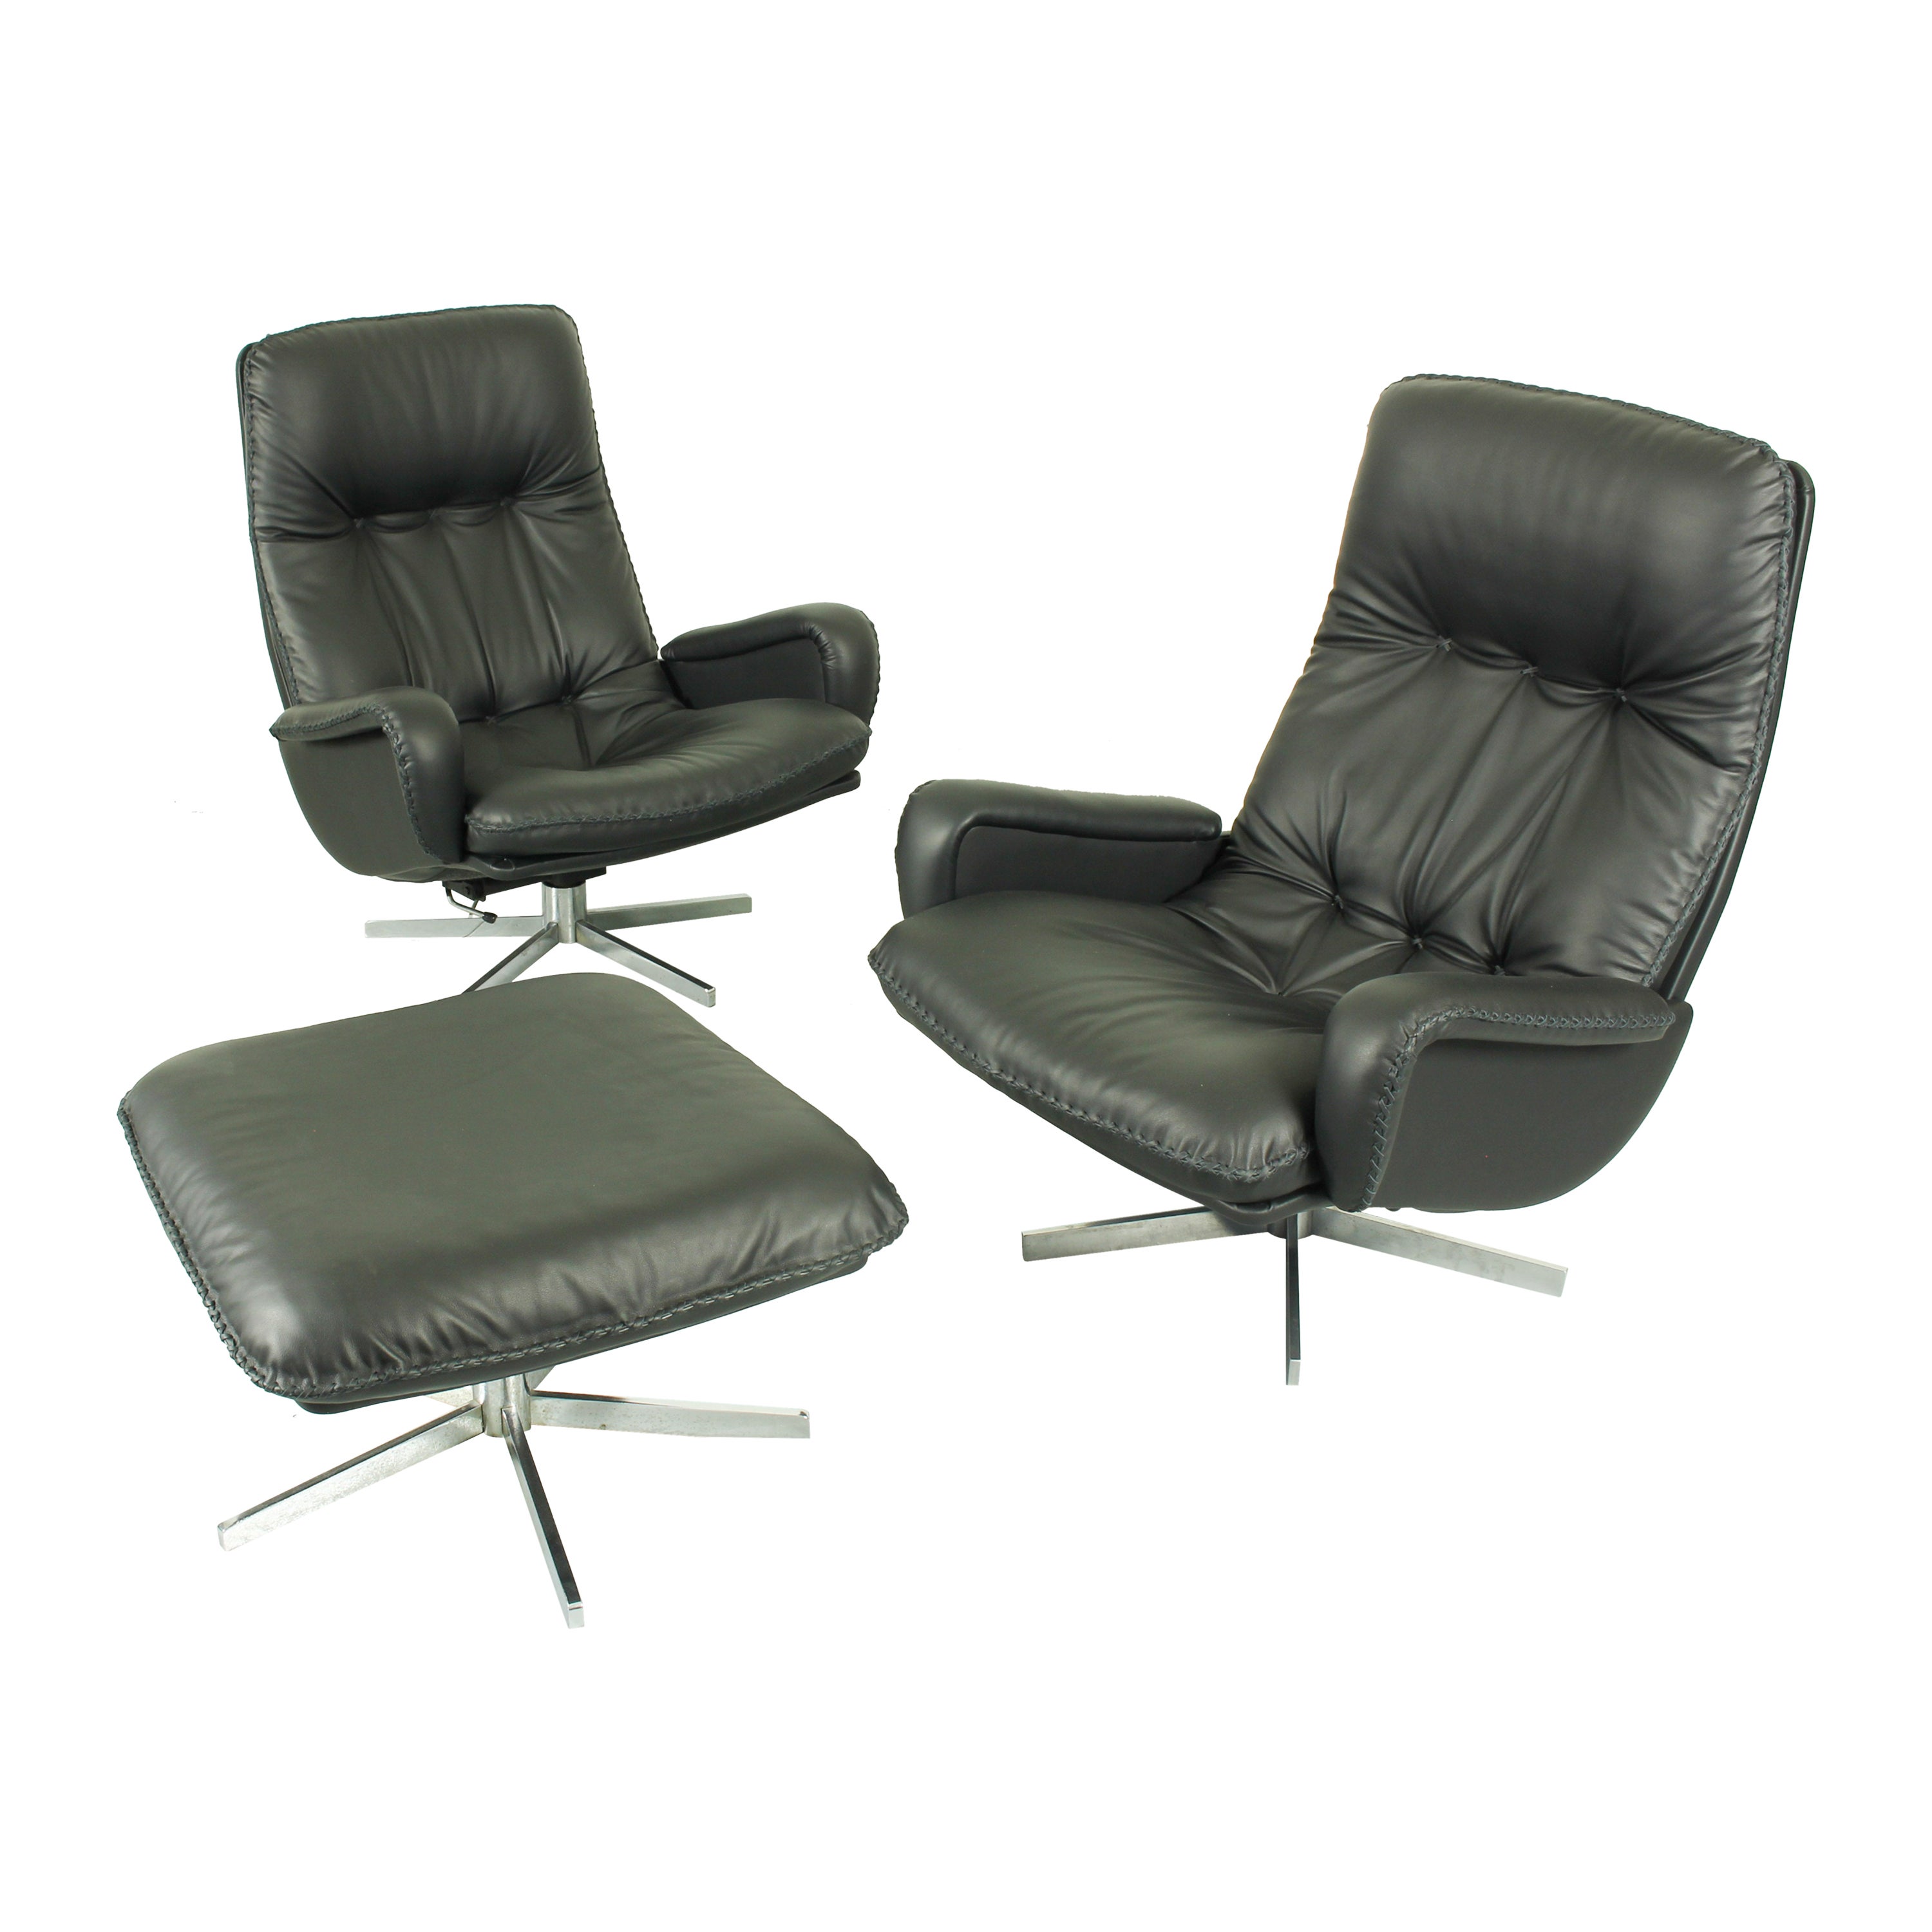 DS231 James Bond highback swivel chairs and matching ottoman by de Sede Switzerl For Sale